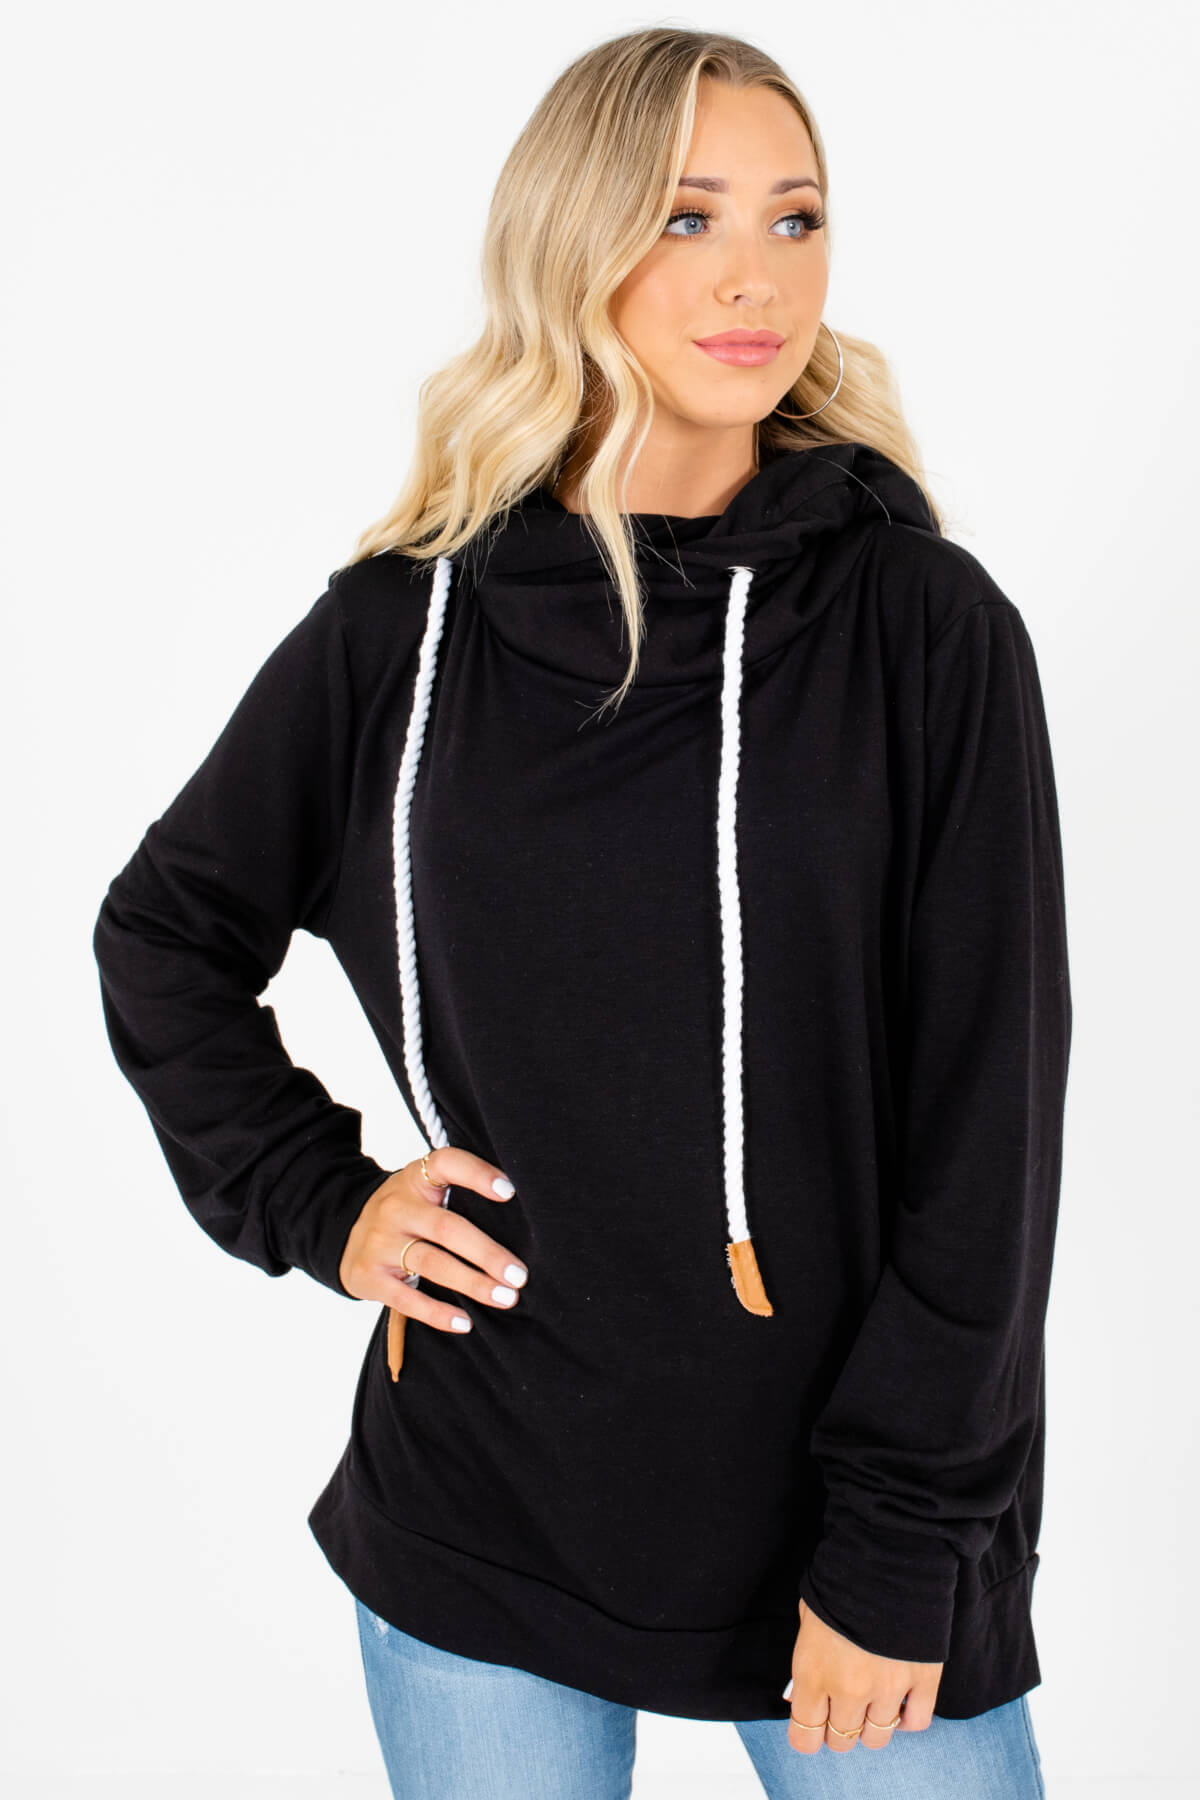 Black Cute and Comfortable Boutique Hoodies for Women